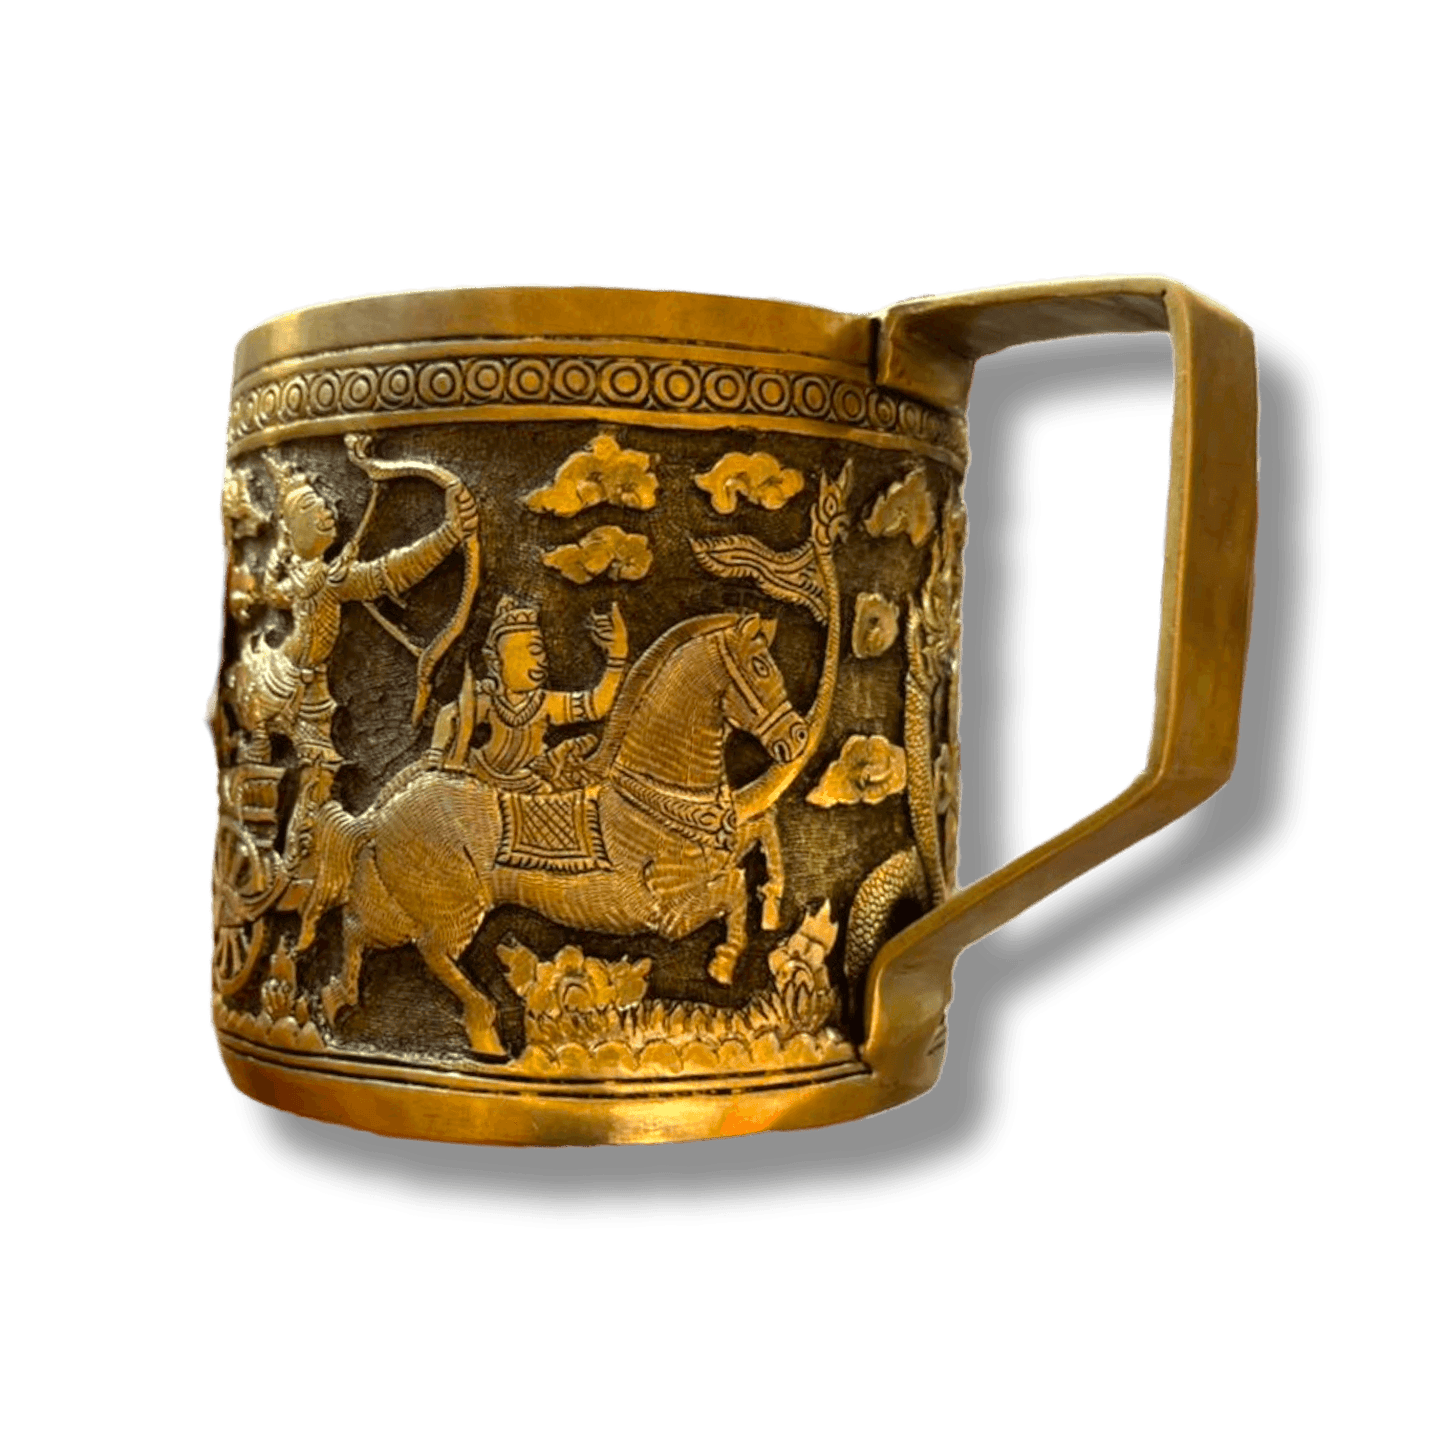 Hand Engraved Solid Brass Mug with Handle - Khmer Rural Hand Engraved Solid Brass Mug with Handle - Warriors and Horse 